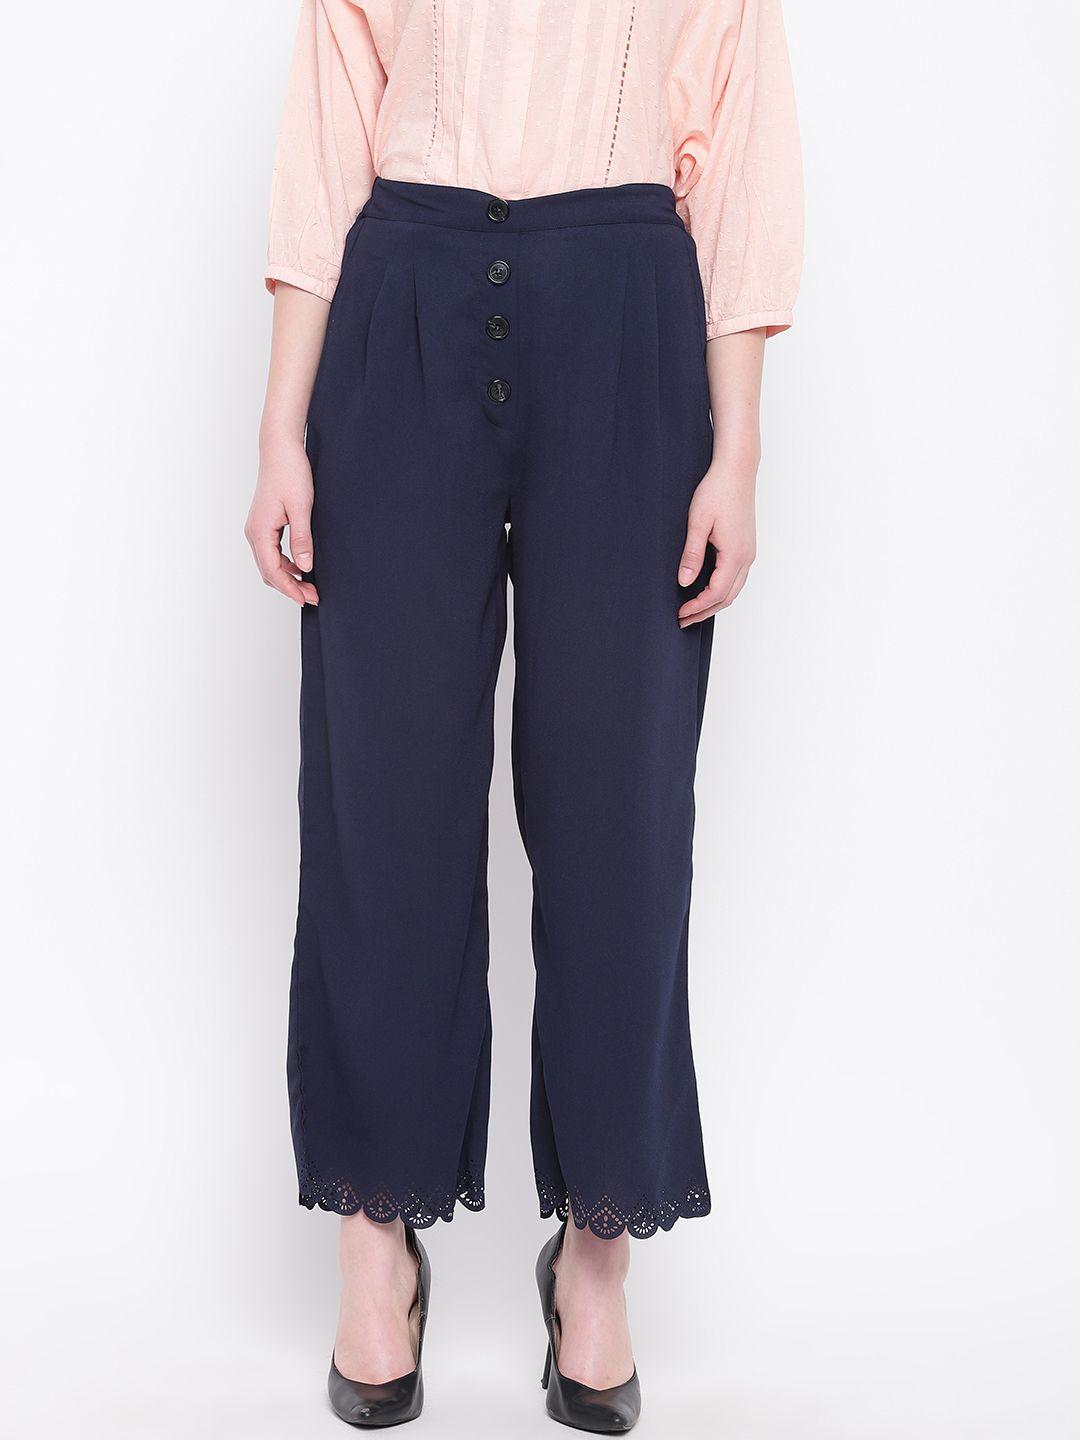 marie claire women navy blue straight fit solid parallel trousers